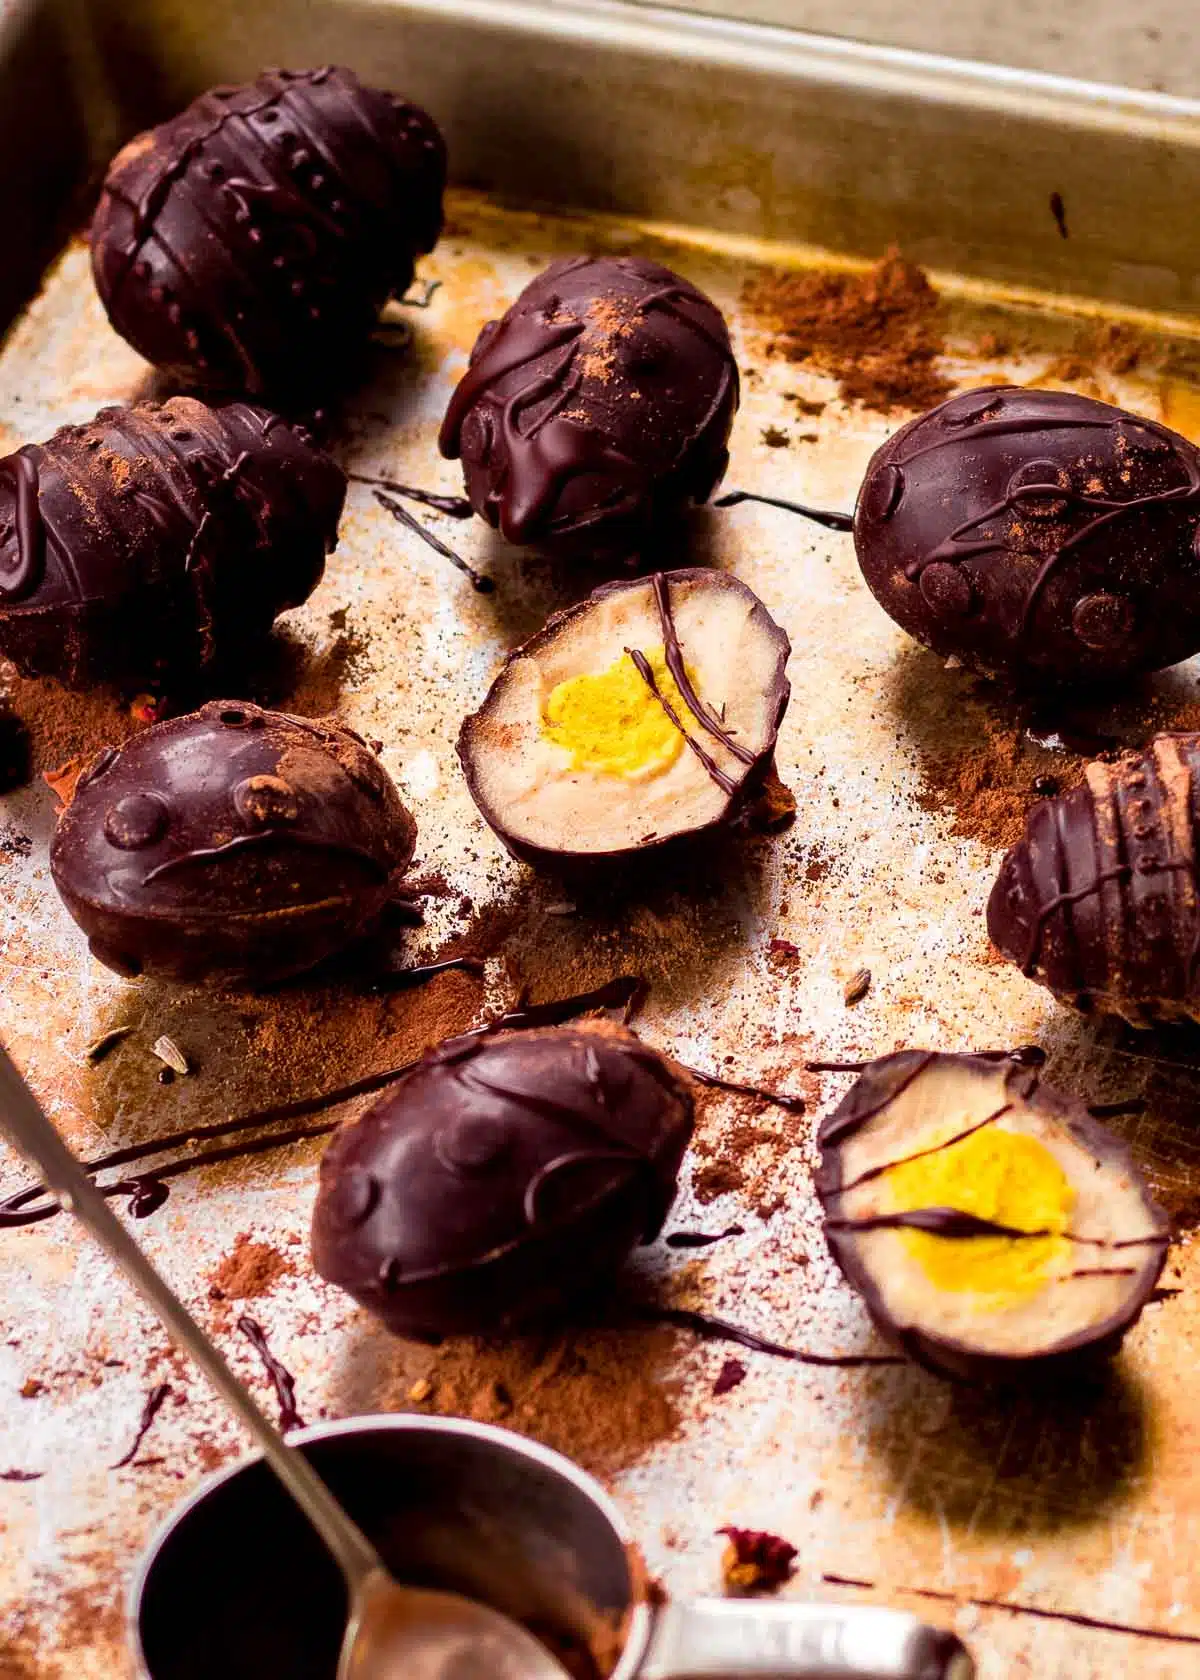 Vegan creme eggs on baking tray drizzled with dark chocolate.